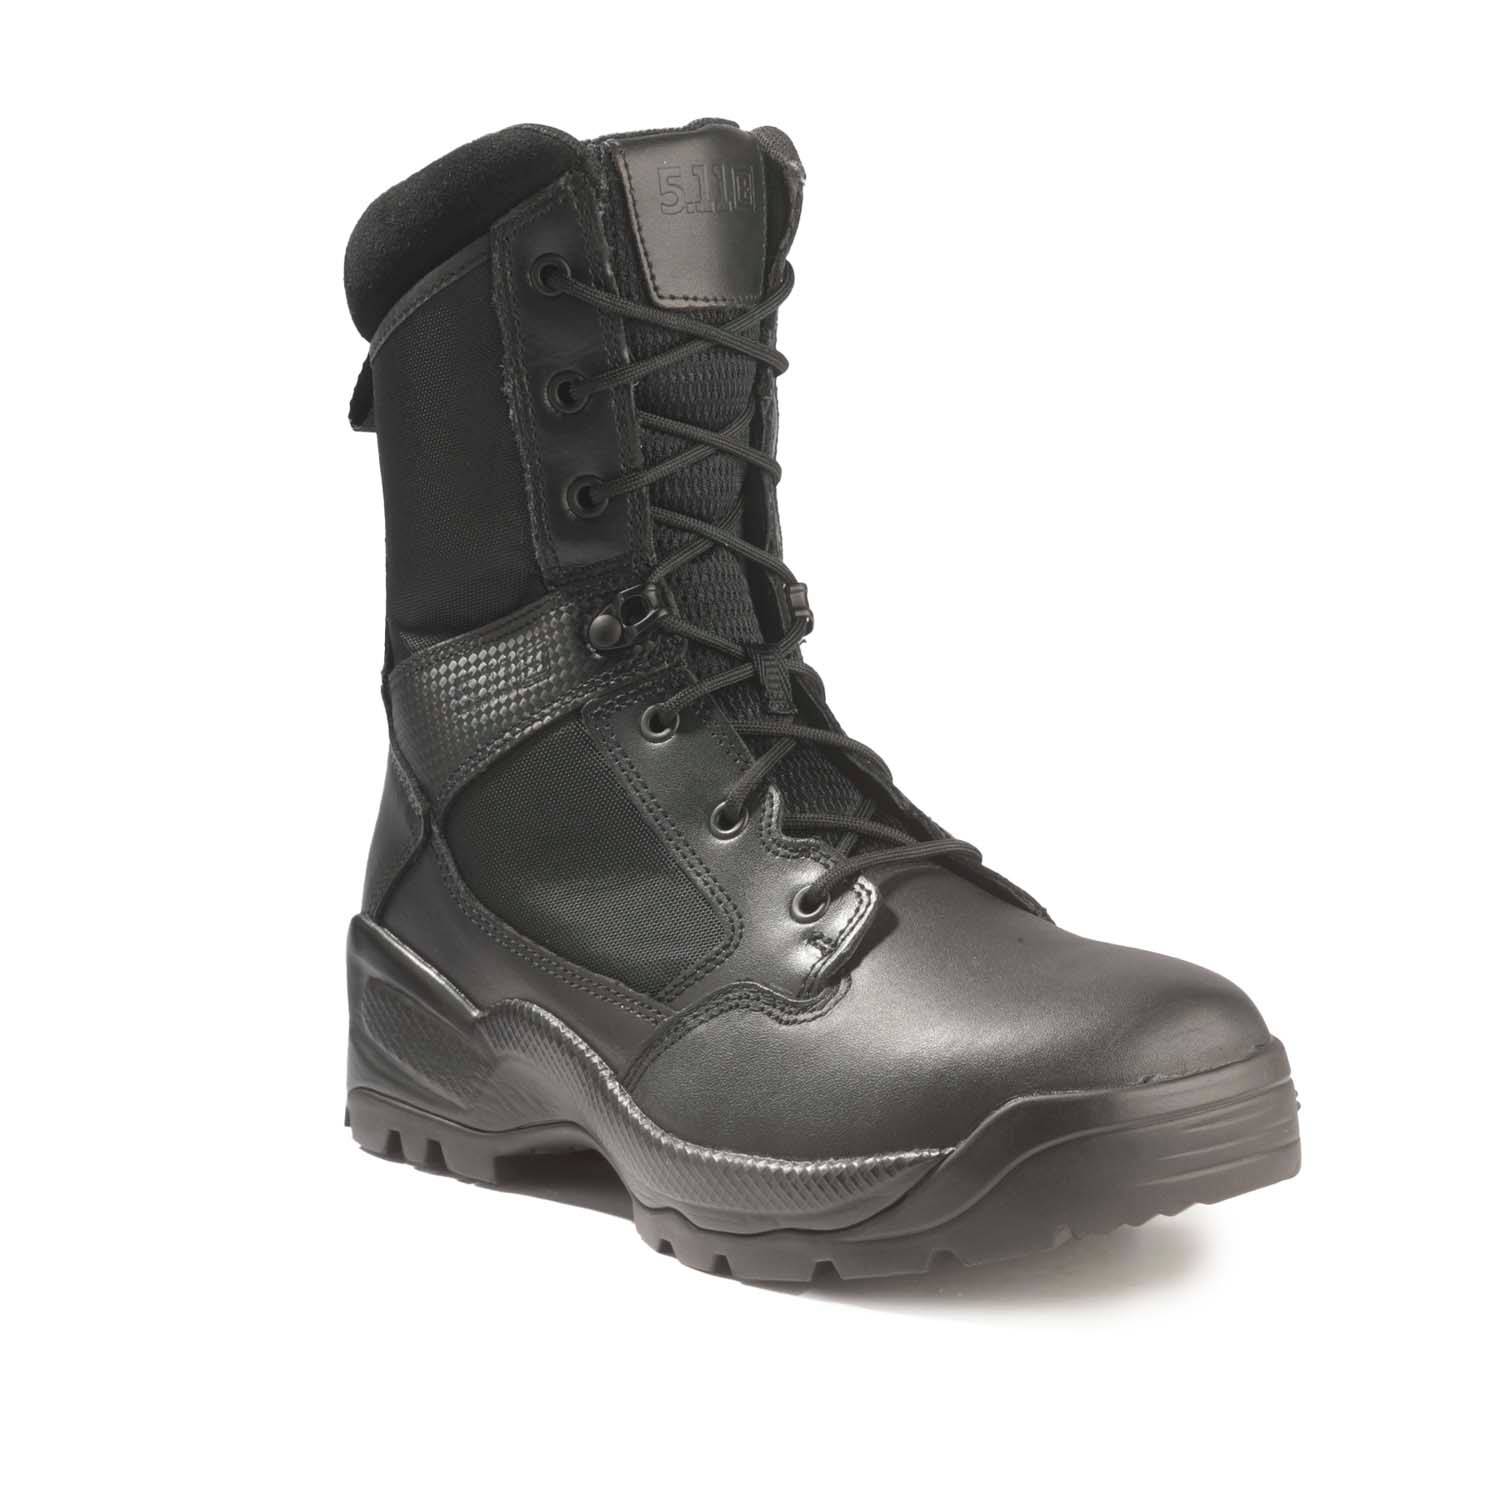 5.11 Tactical A.T.A.C. 2.0 8" Side Zip Duty Boot